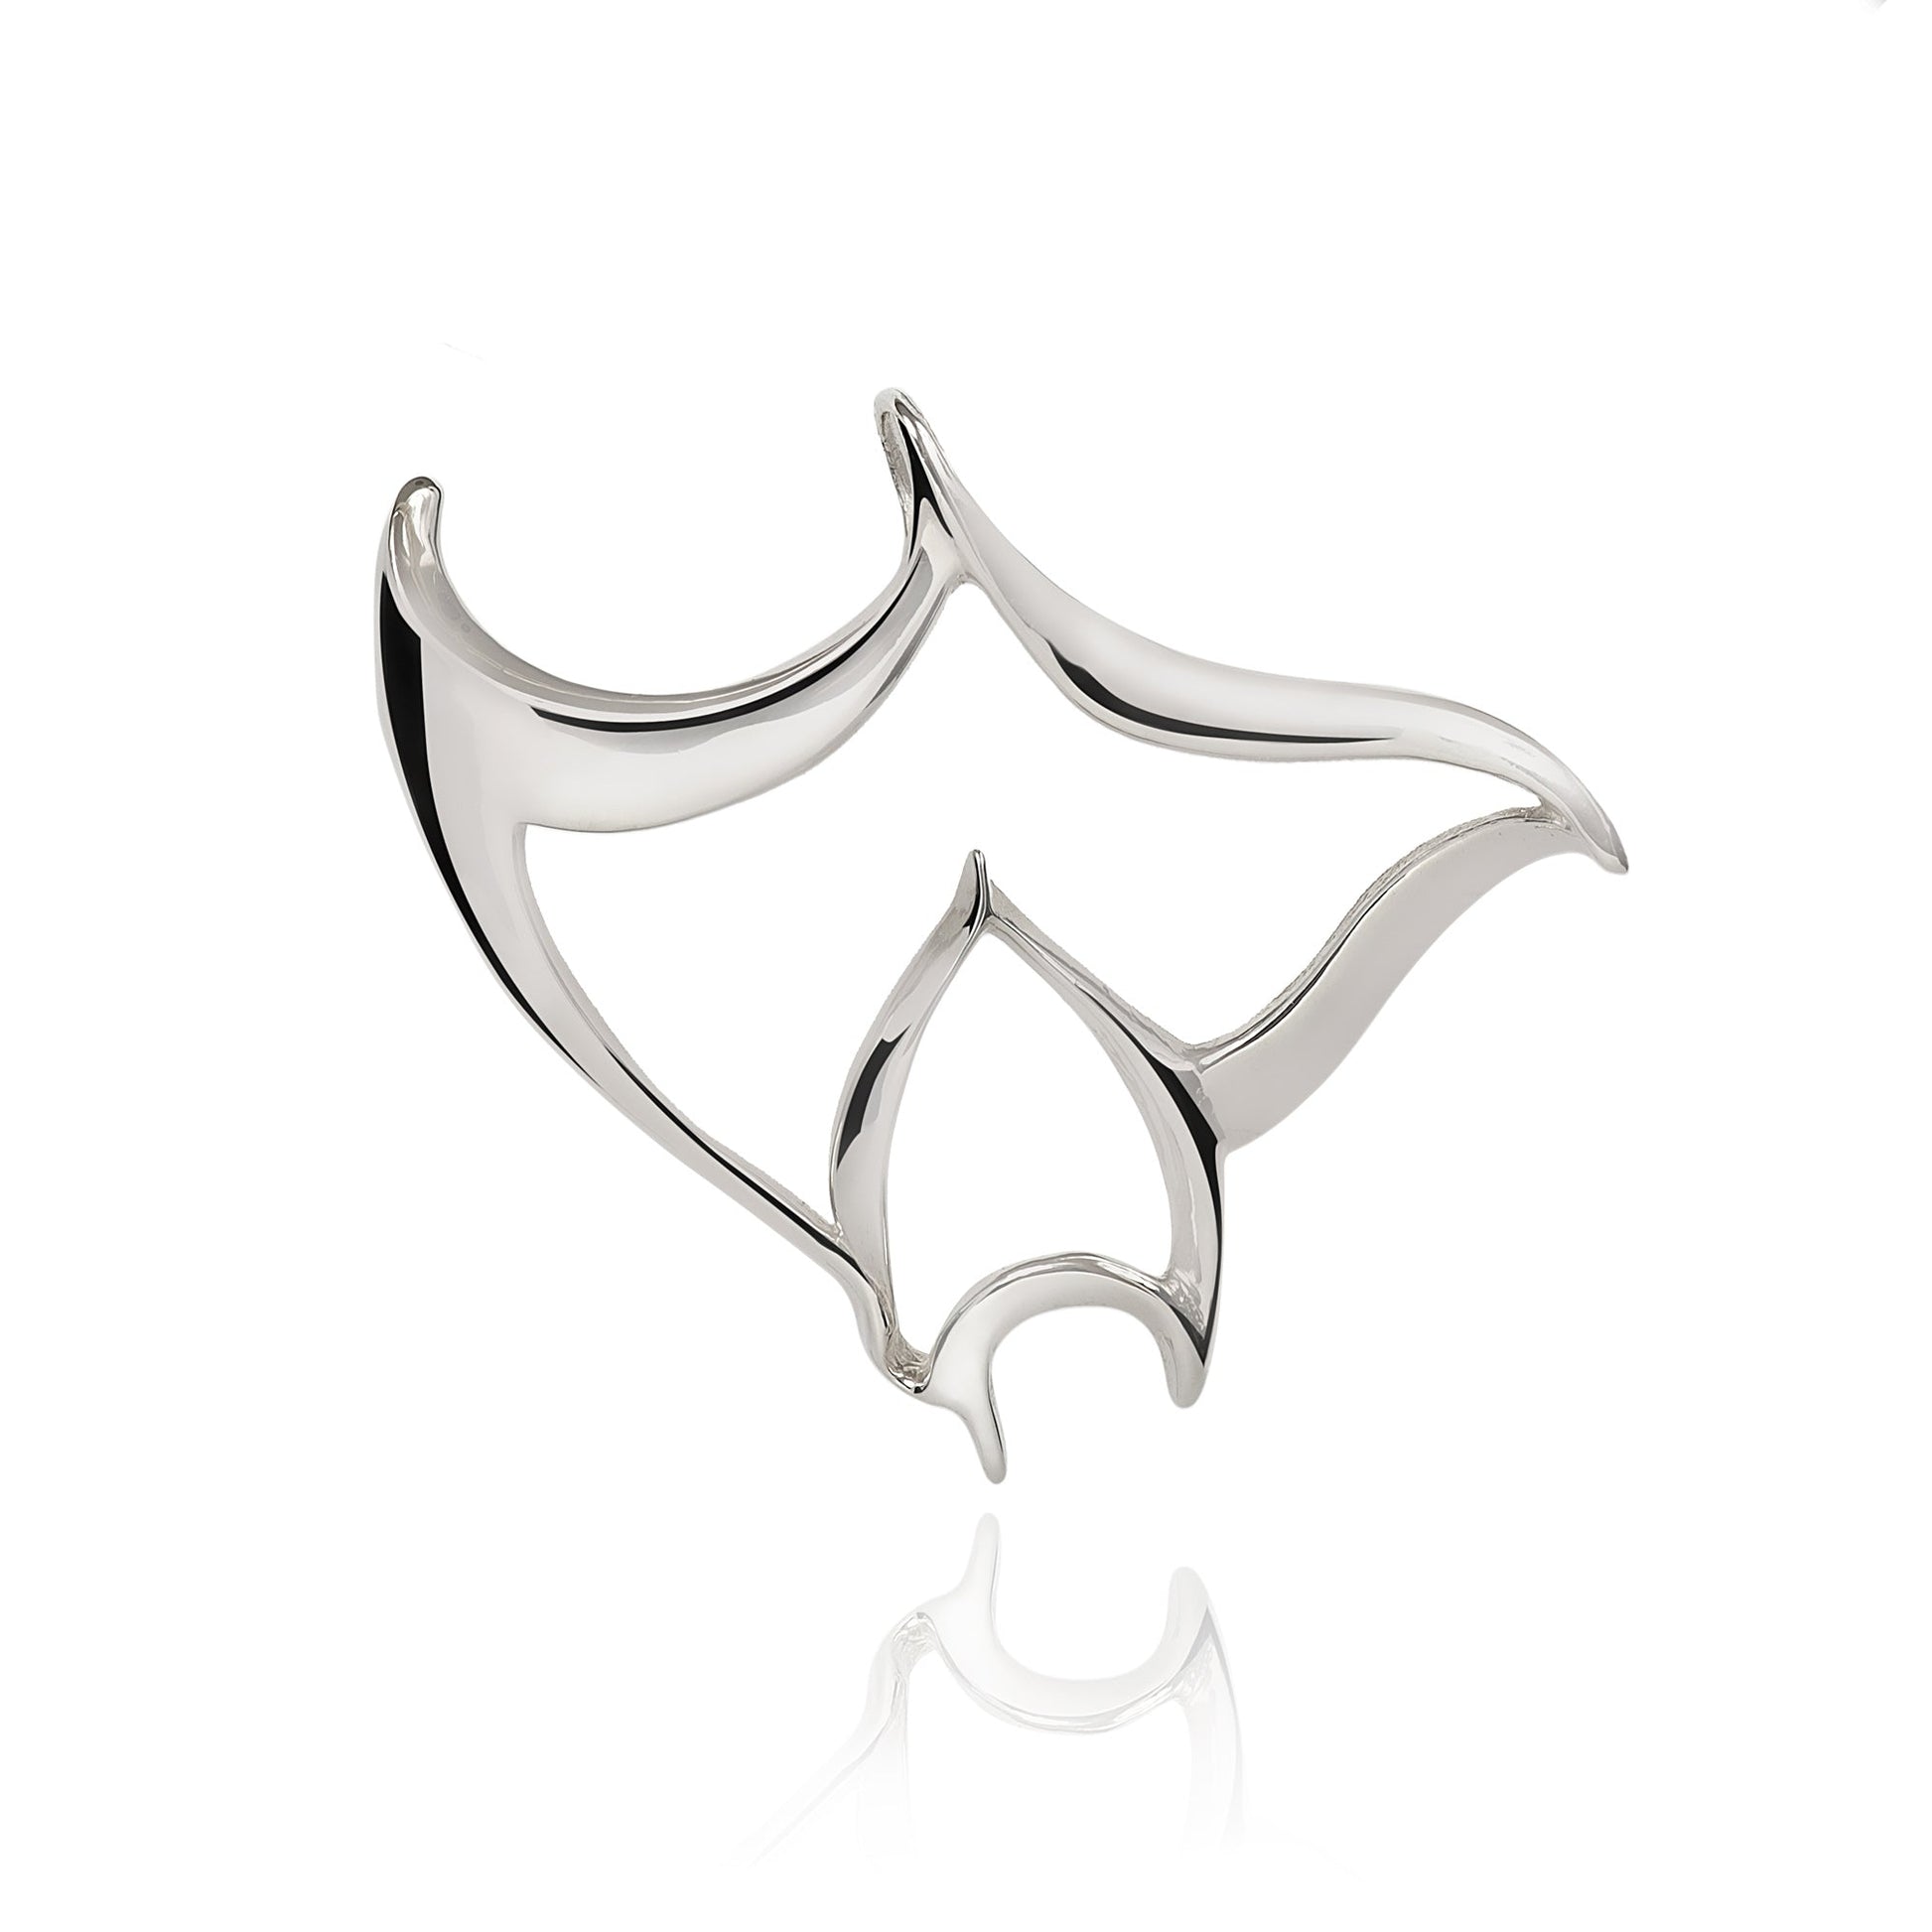 Manta Ray Necklaces for Women- Stingray Necklace Sterling Silver- Stingray Jewelry, Scuba Diving Jewelry, Ocean Inspired Fine Jewelry - The Tool Store